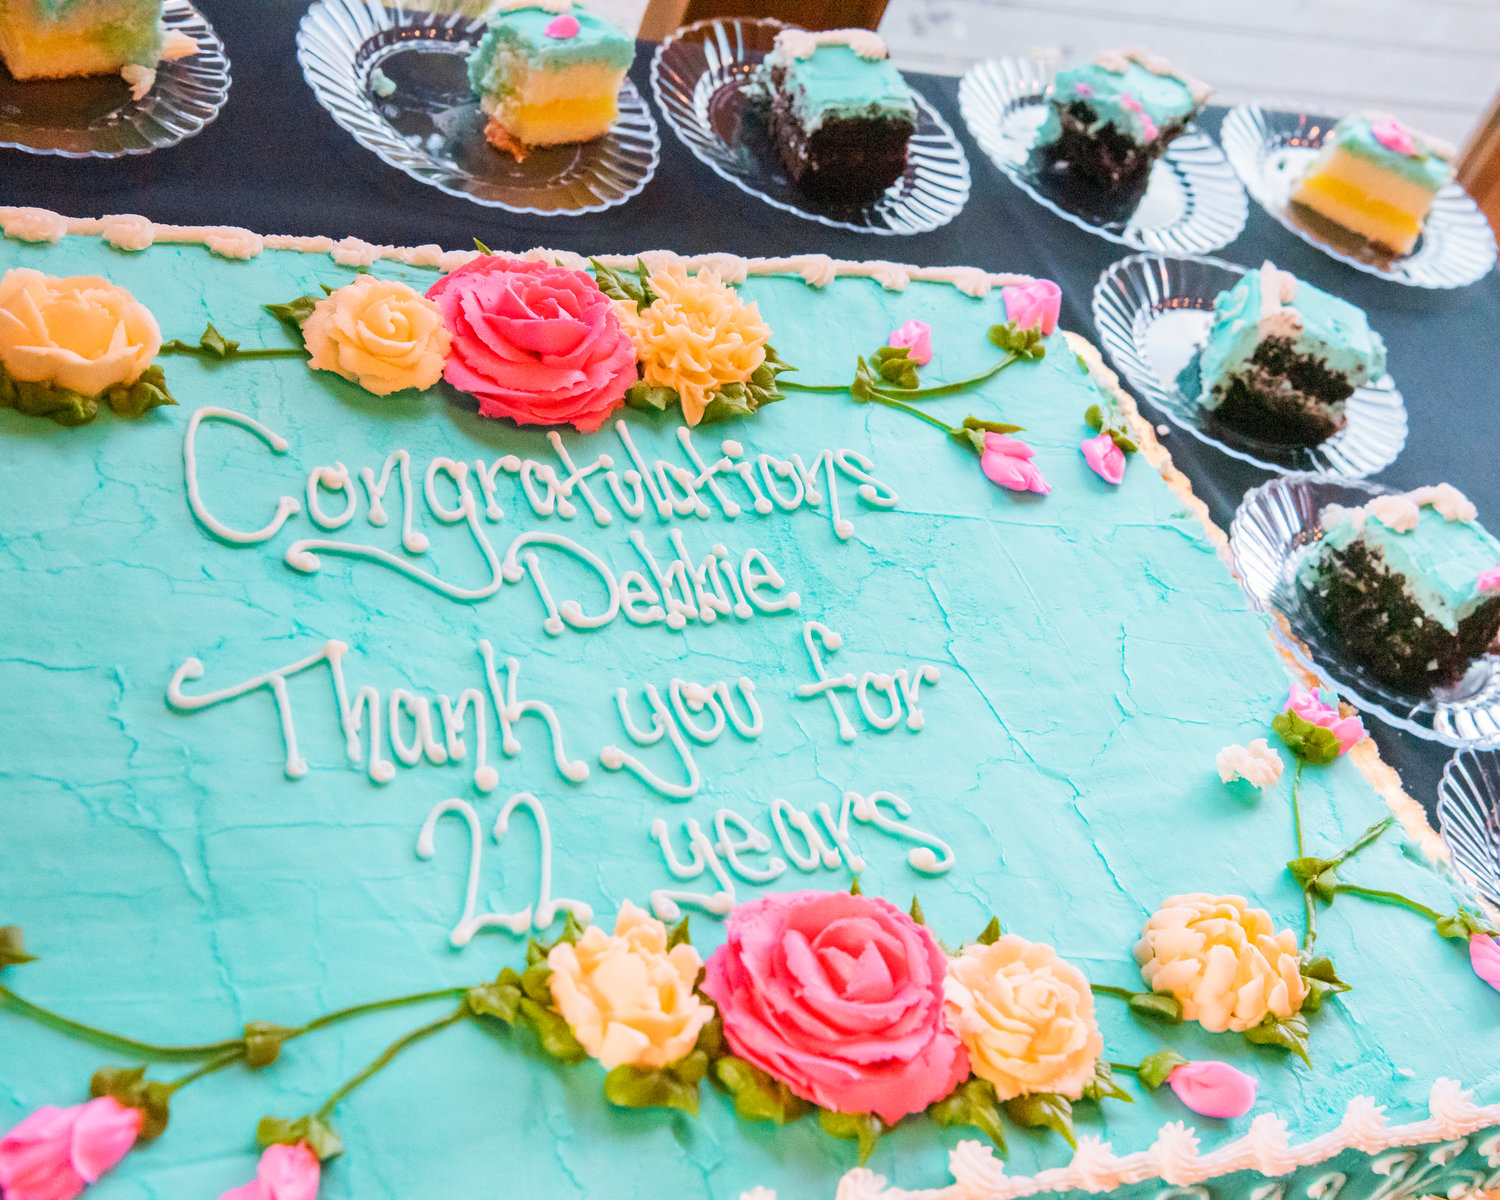 A cake reads “Congratulations Debbie, Thank you for 22 years” during a retirement party Friday in Chehalis.